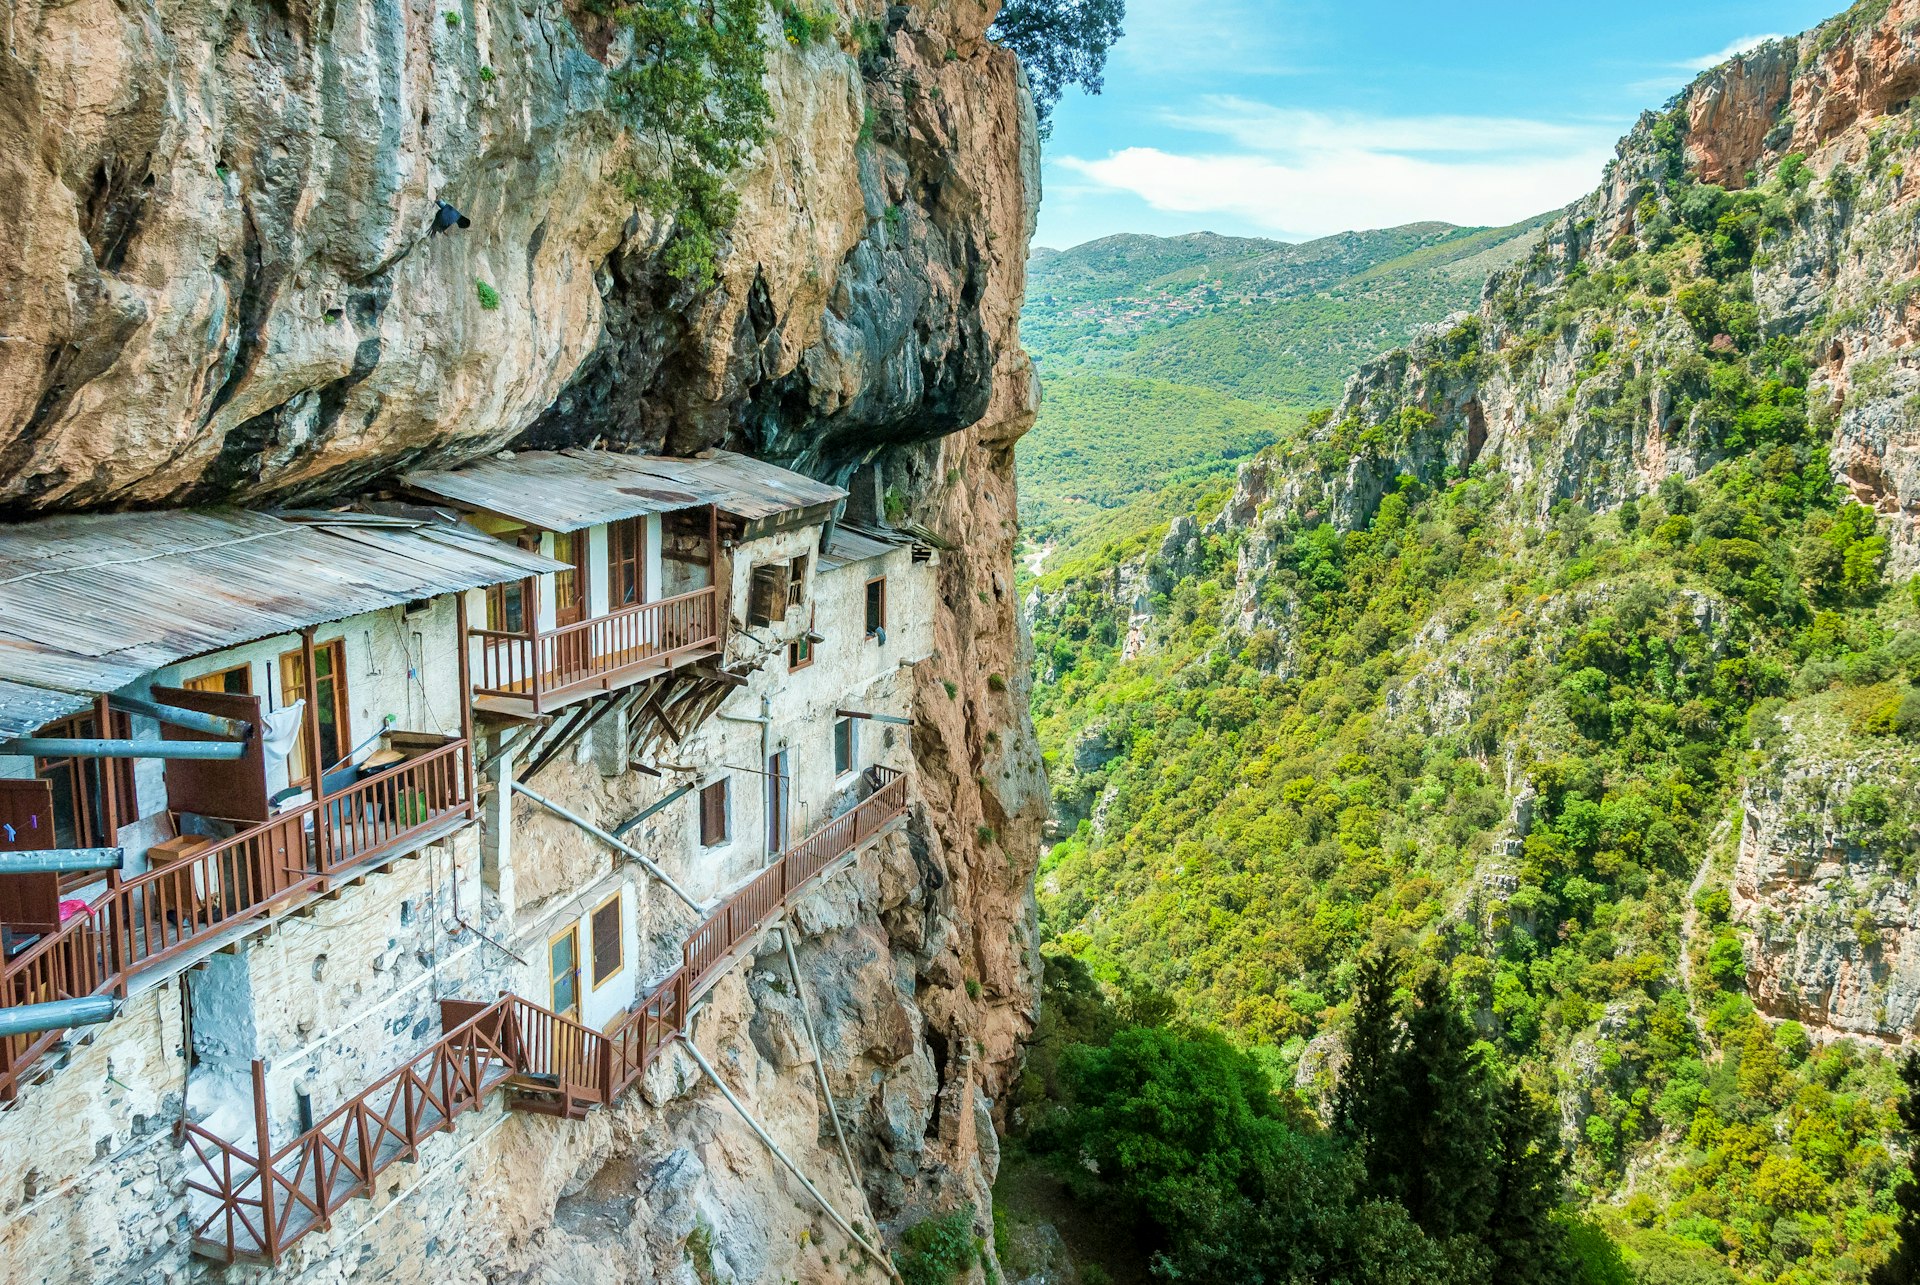 A rocky monastery built into the side of a cliff